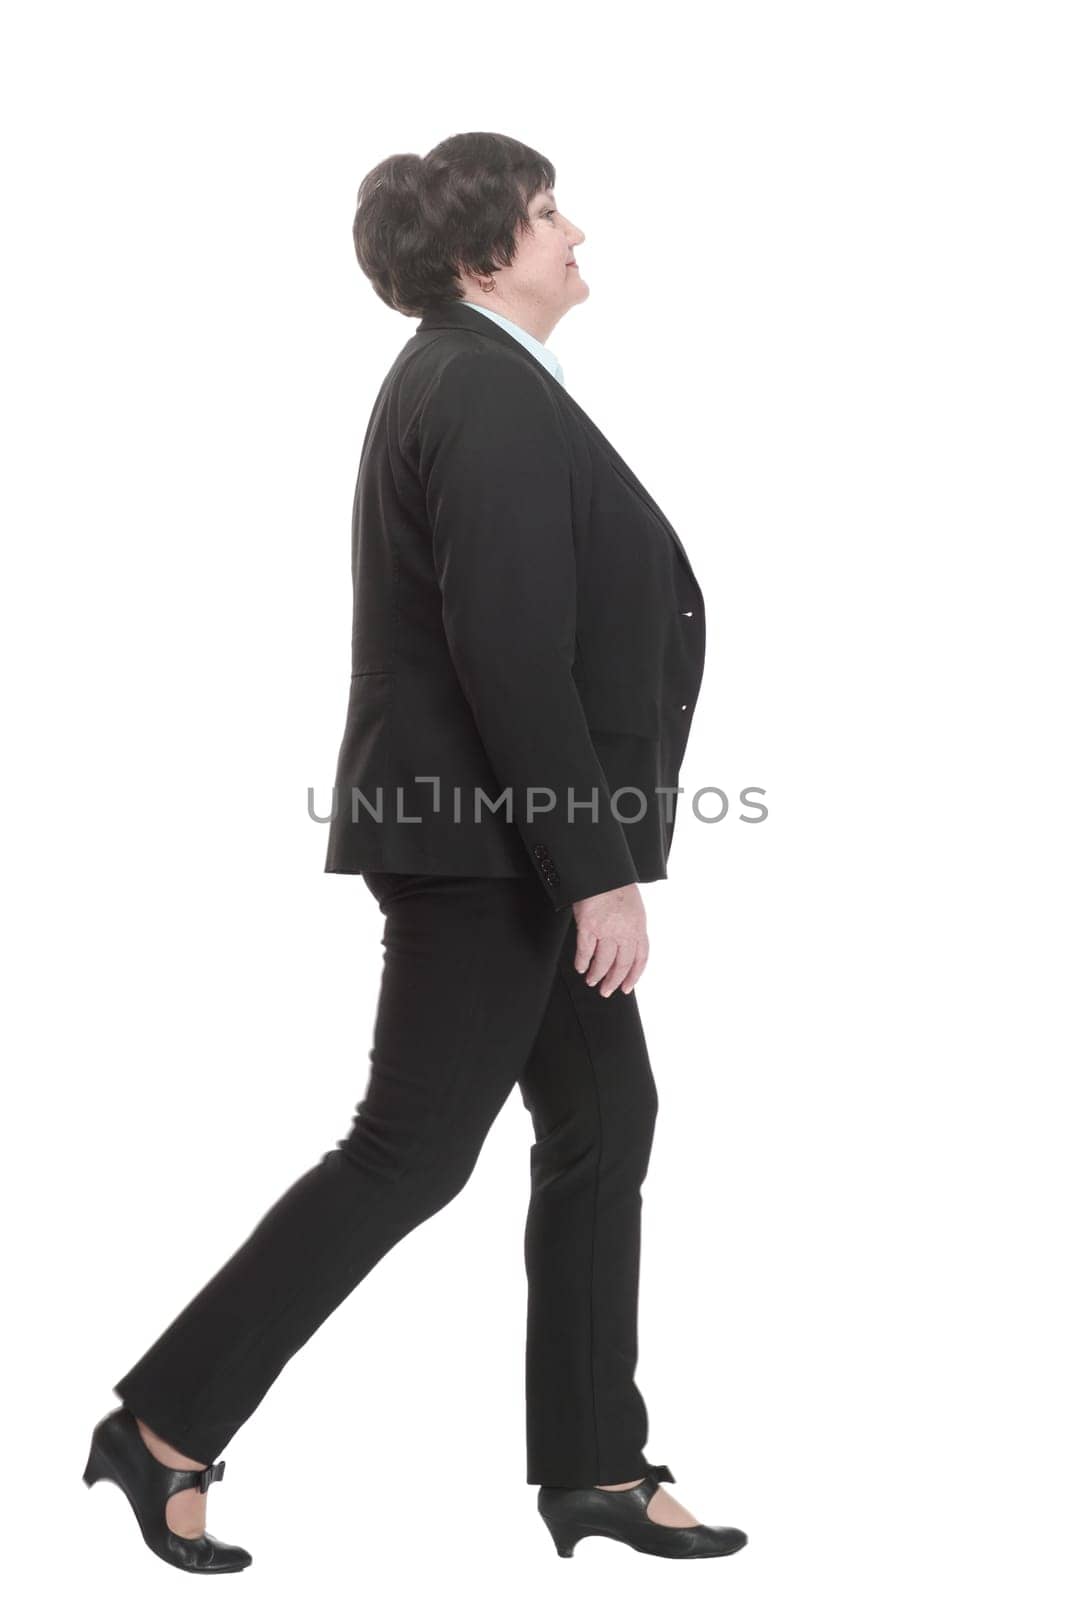 Mature business woman in a pantsuit striding forward. isolated on a white background.